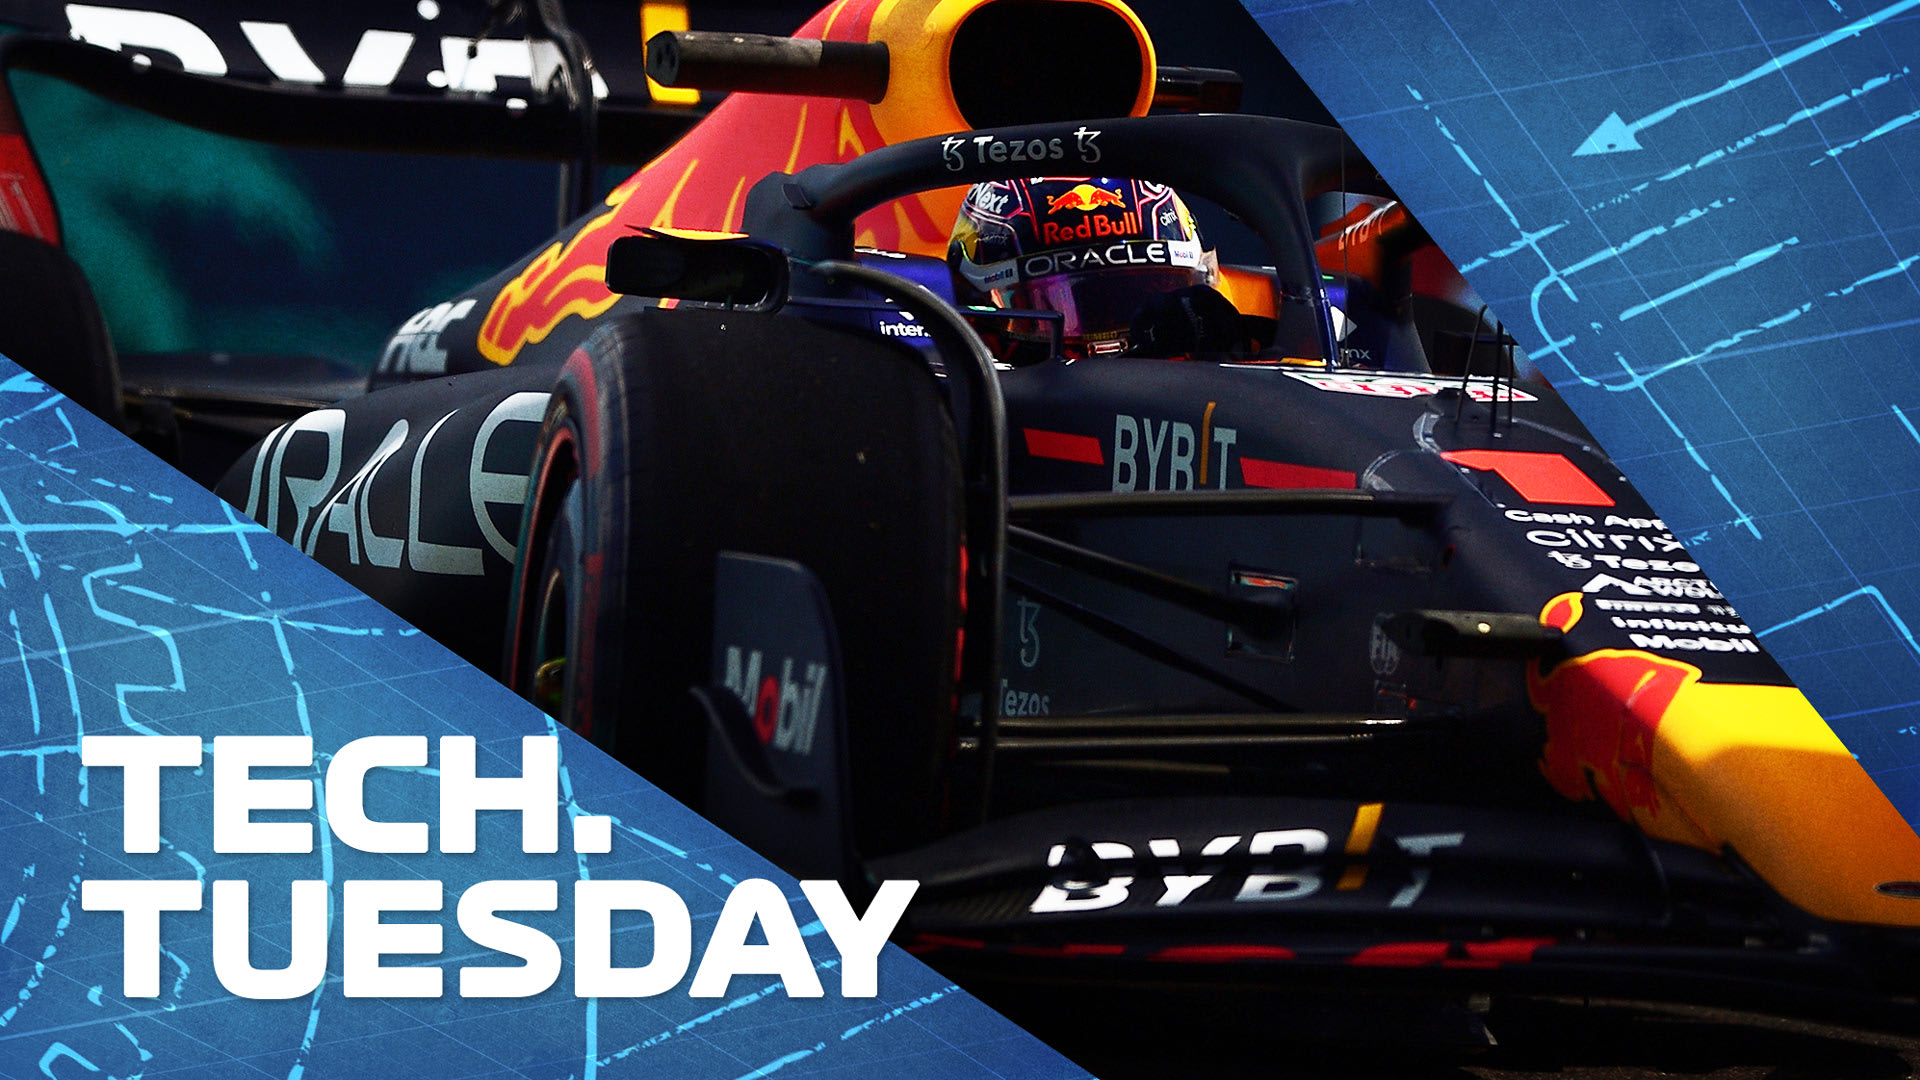 TECH TUESDAY: Charting Red Bull's 2022 upgrades before Ferrari aim to hit back in Spain - Formula 1